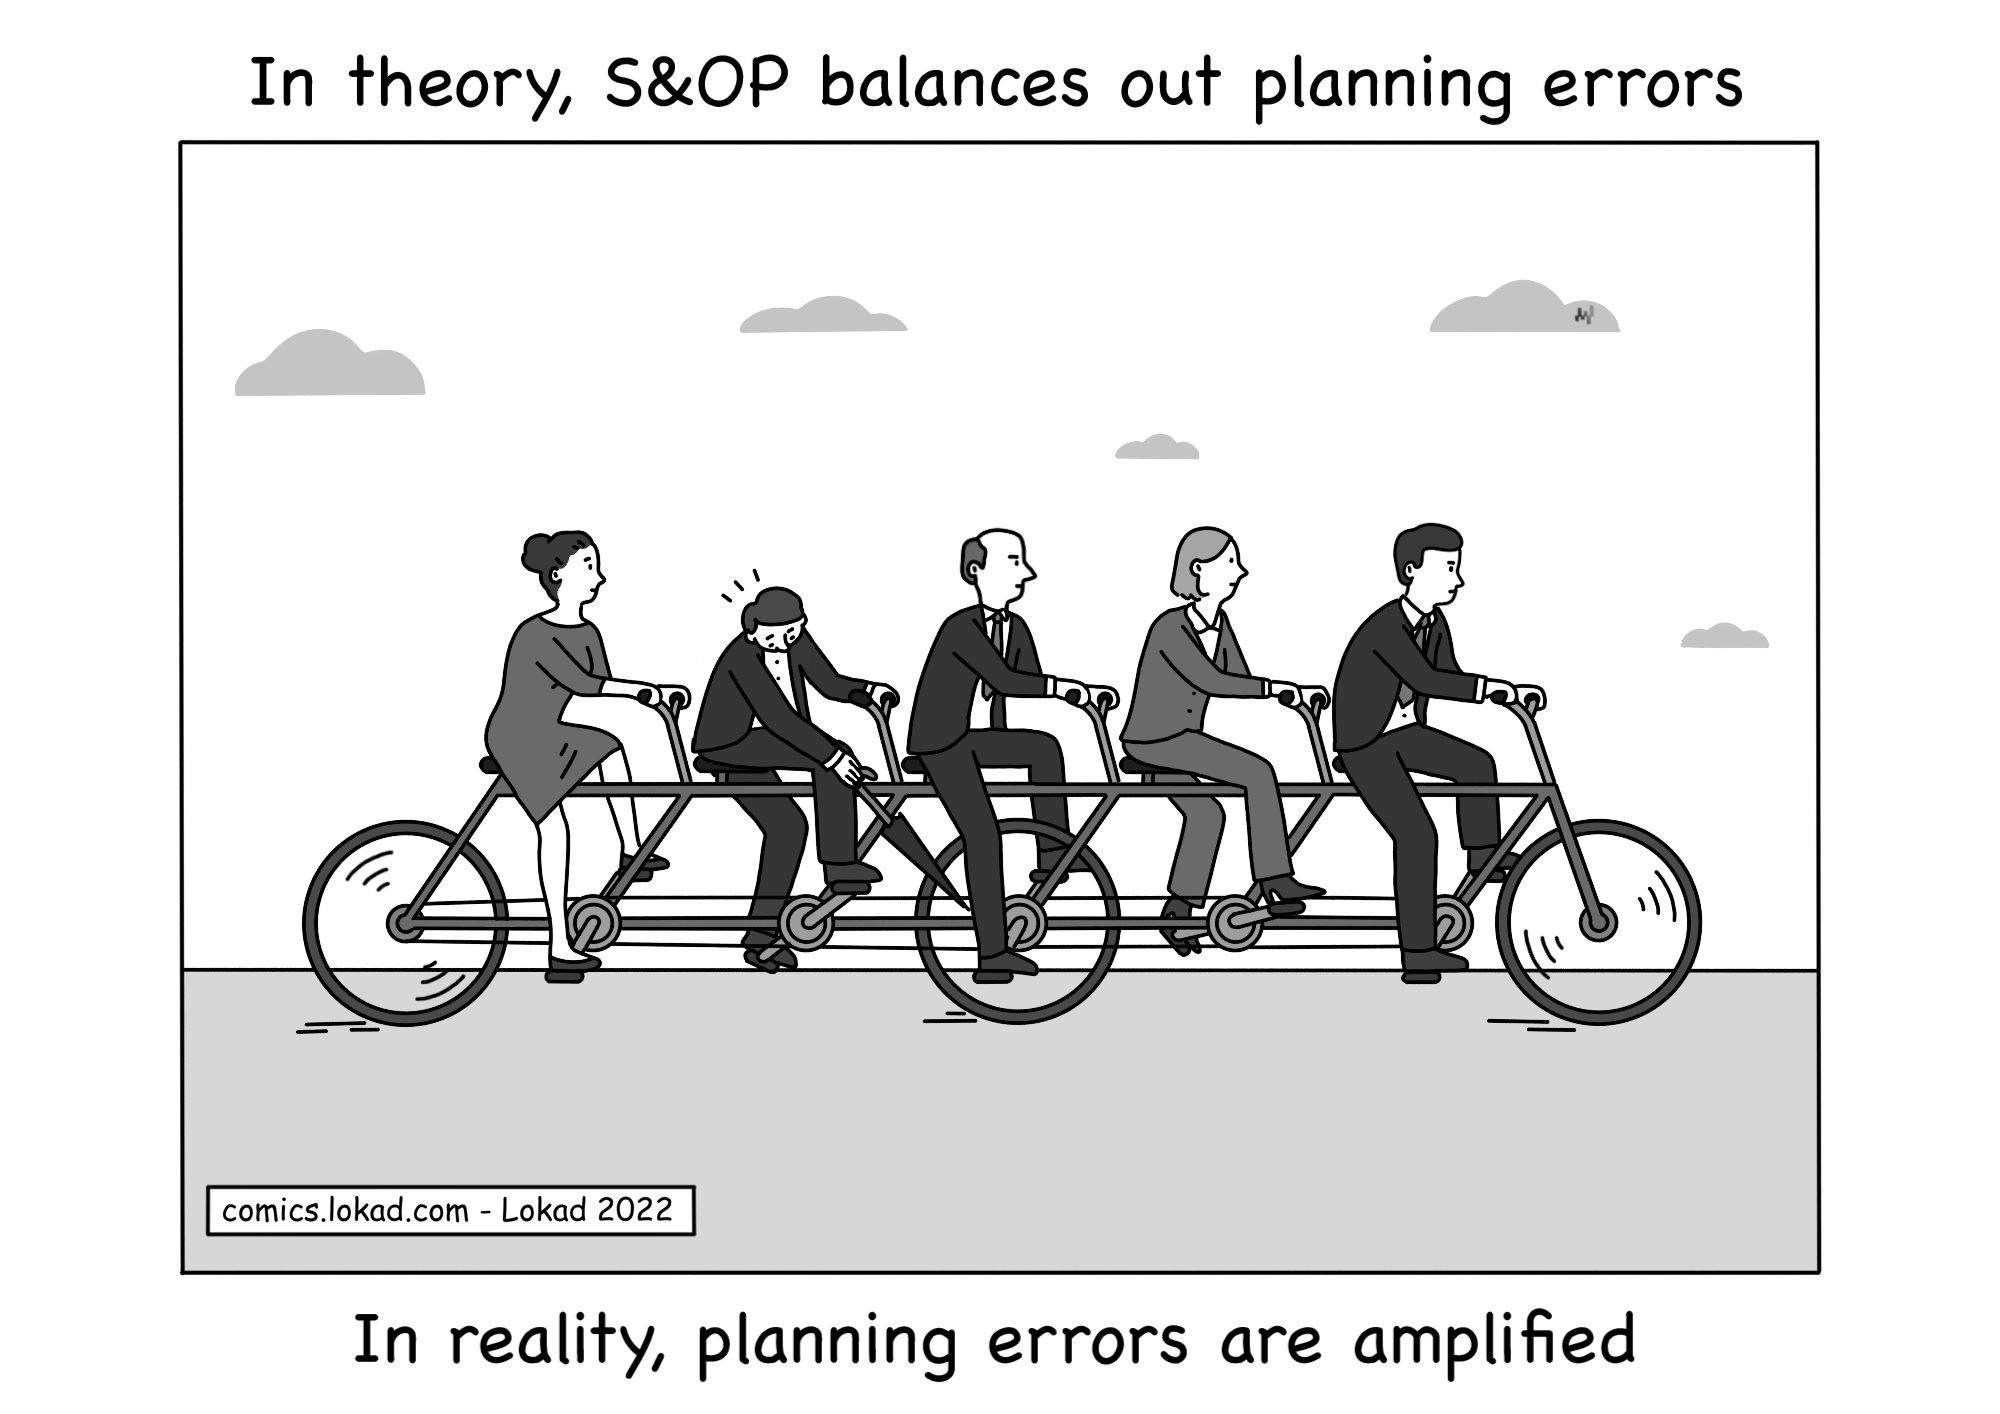 In theory, S&OP balances out planning errors